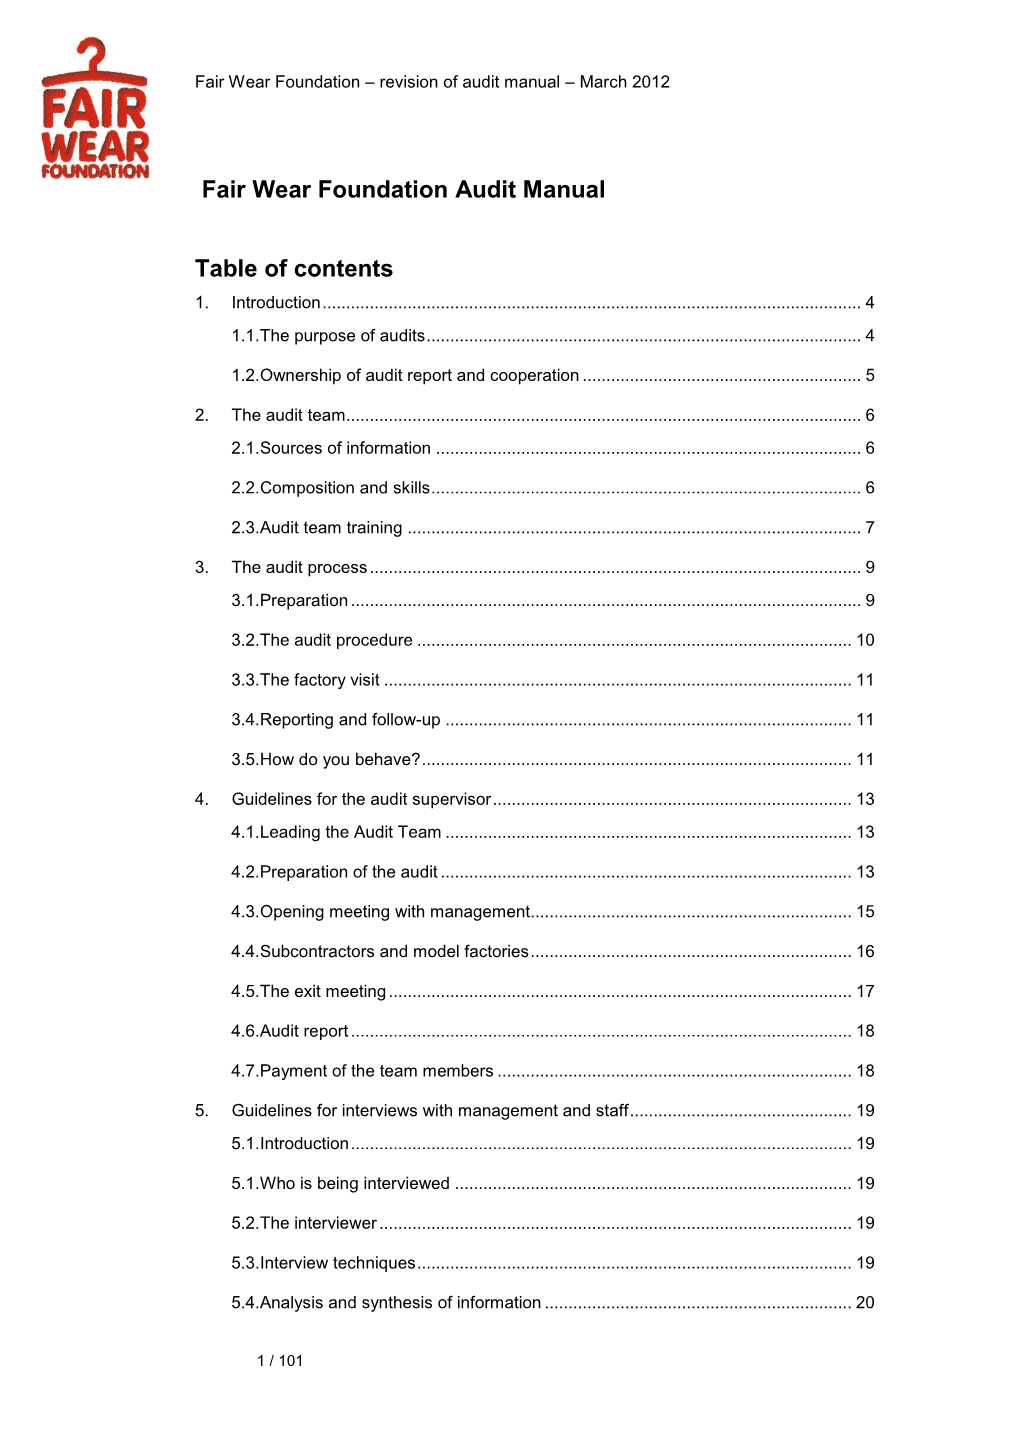 Fair Wear Foundation Audit Manual Table of Contents